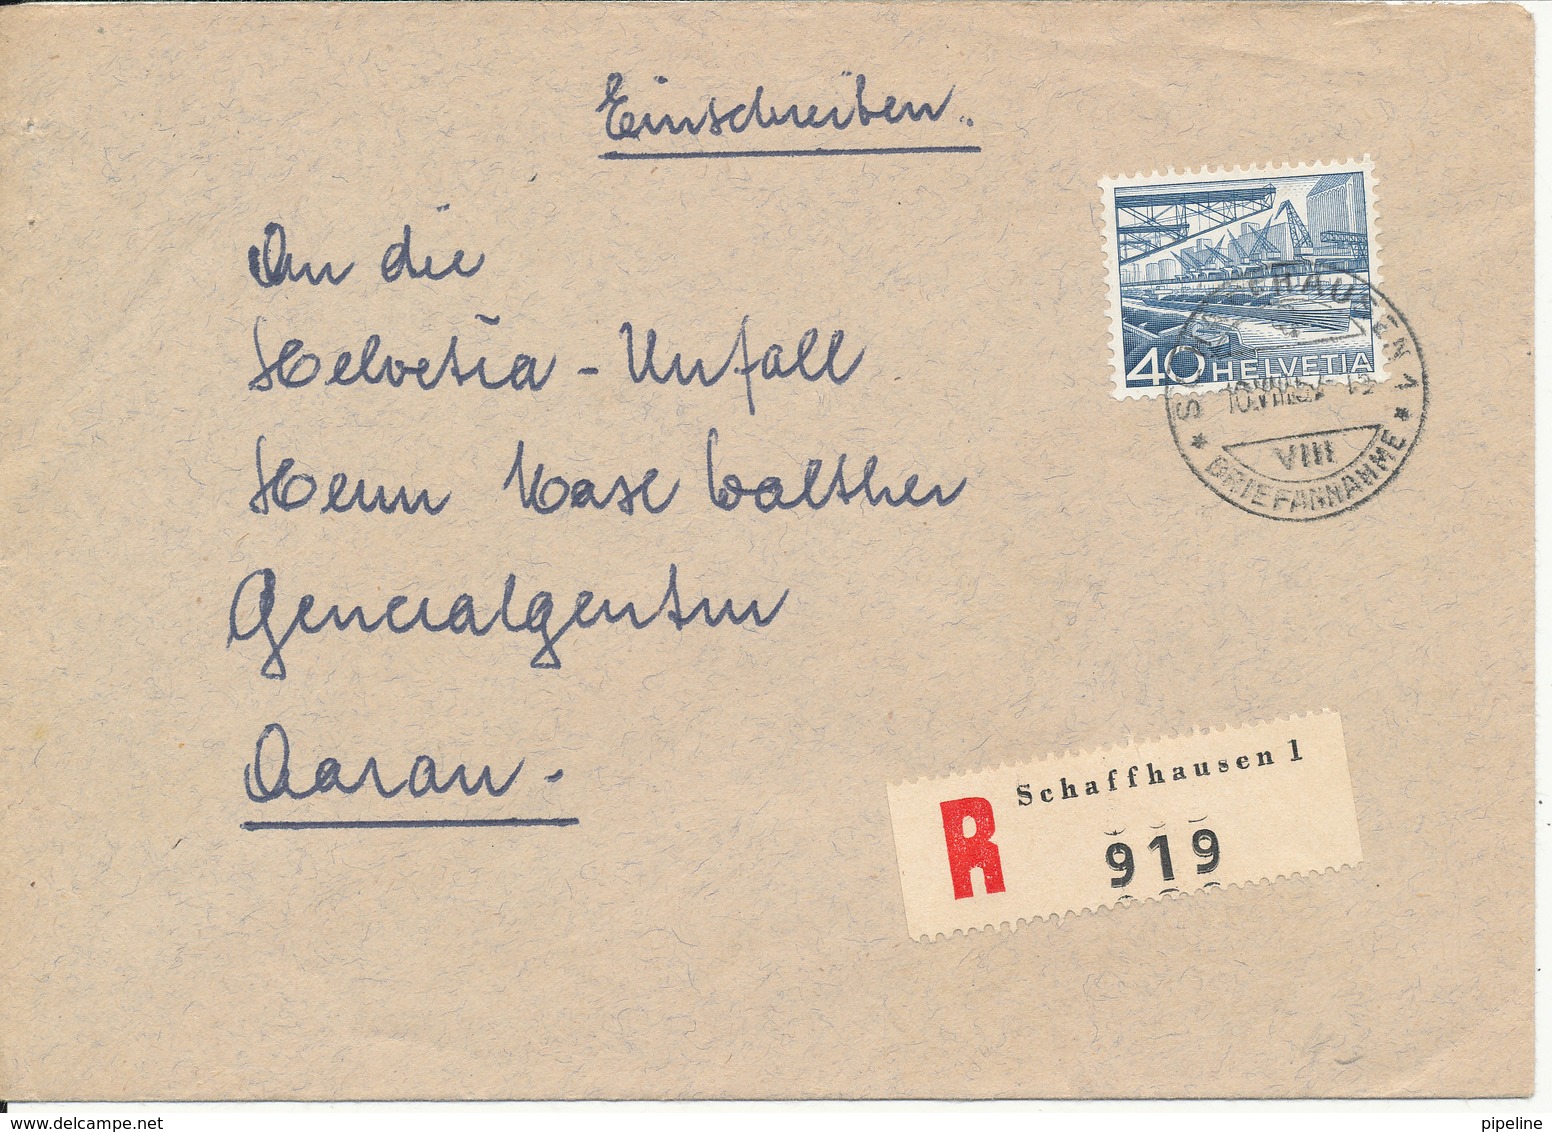 Switzerland Registered Cover Sent To Denmark Schaffhausen 10-8-1957 Single Franked - Covers & Documents